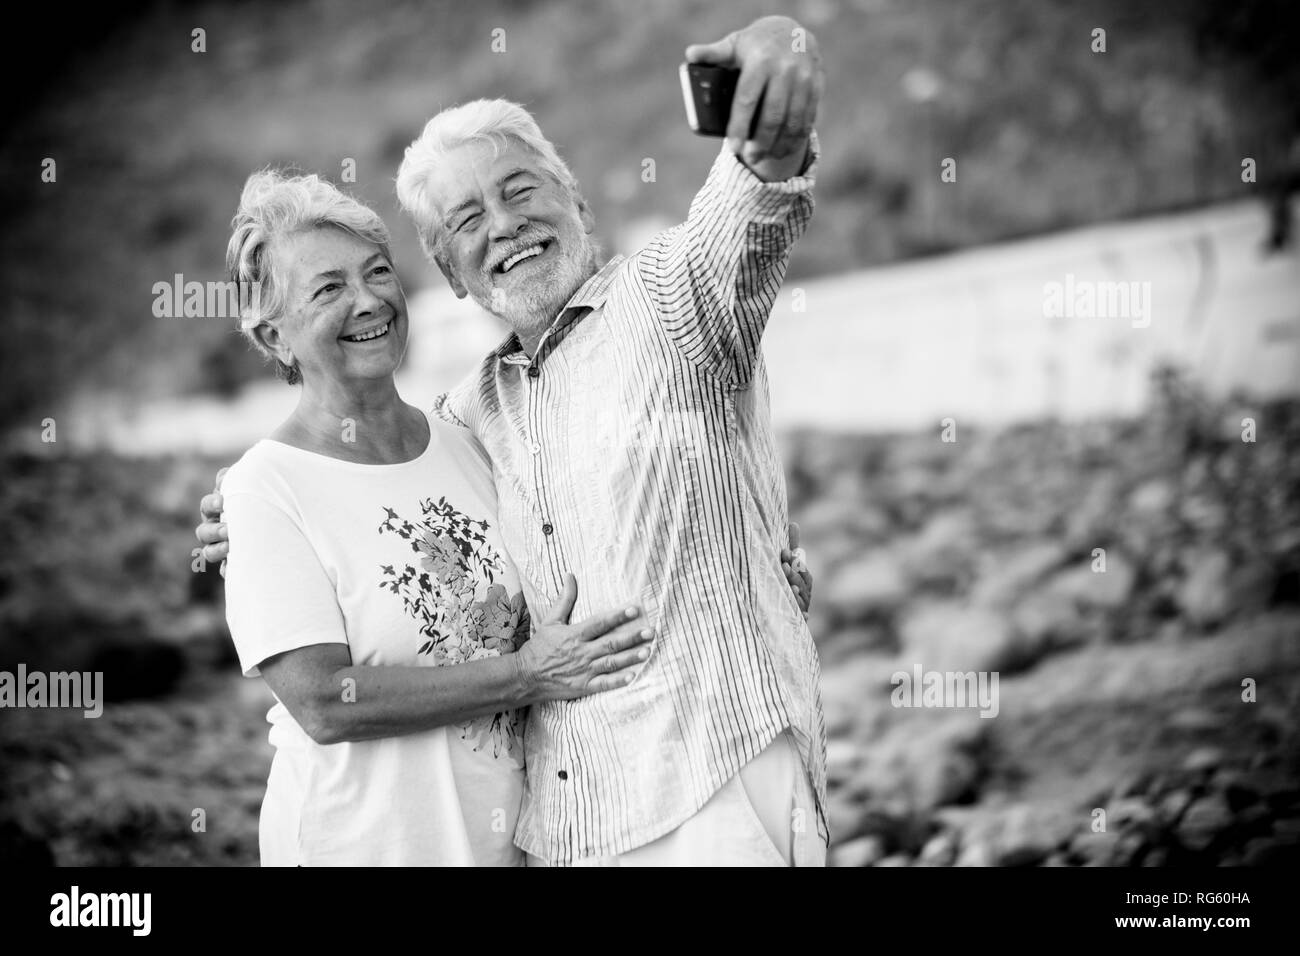 Black and white image retro concept filter - couple of happy smiling cheerful aged elderly people taking selfie picture with modern smart phone to sha Stock Photo